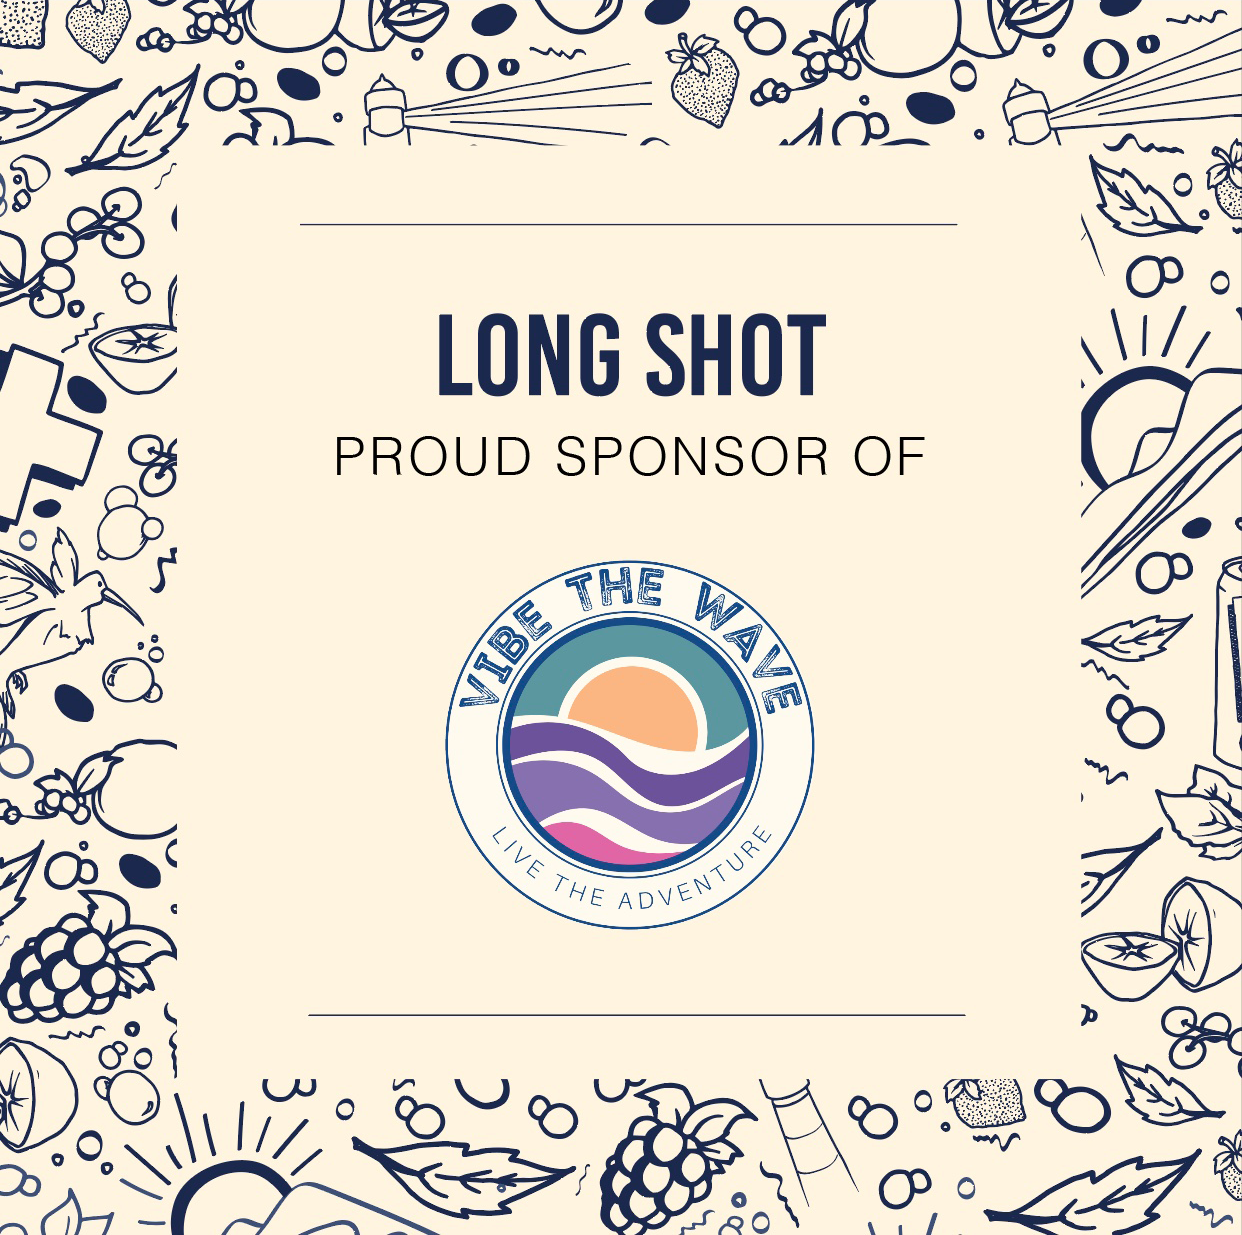 Long Shot's collaboration with Vibe The Wave